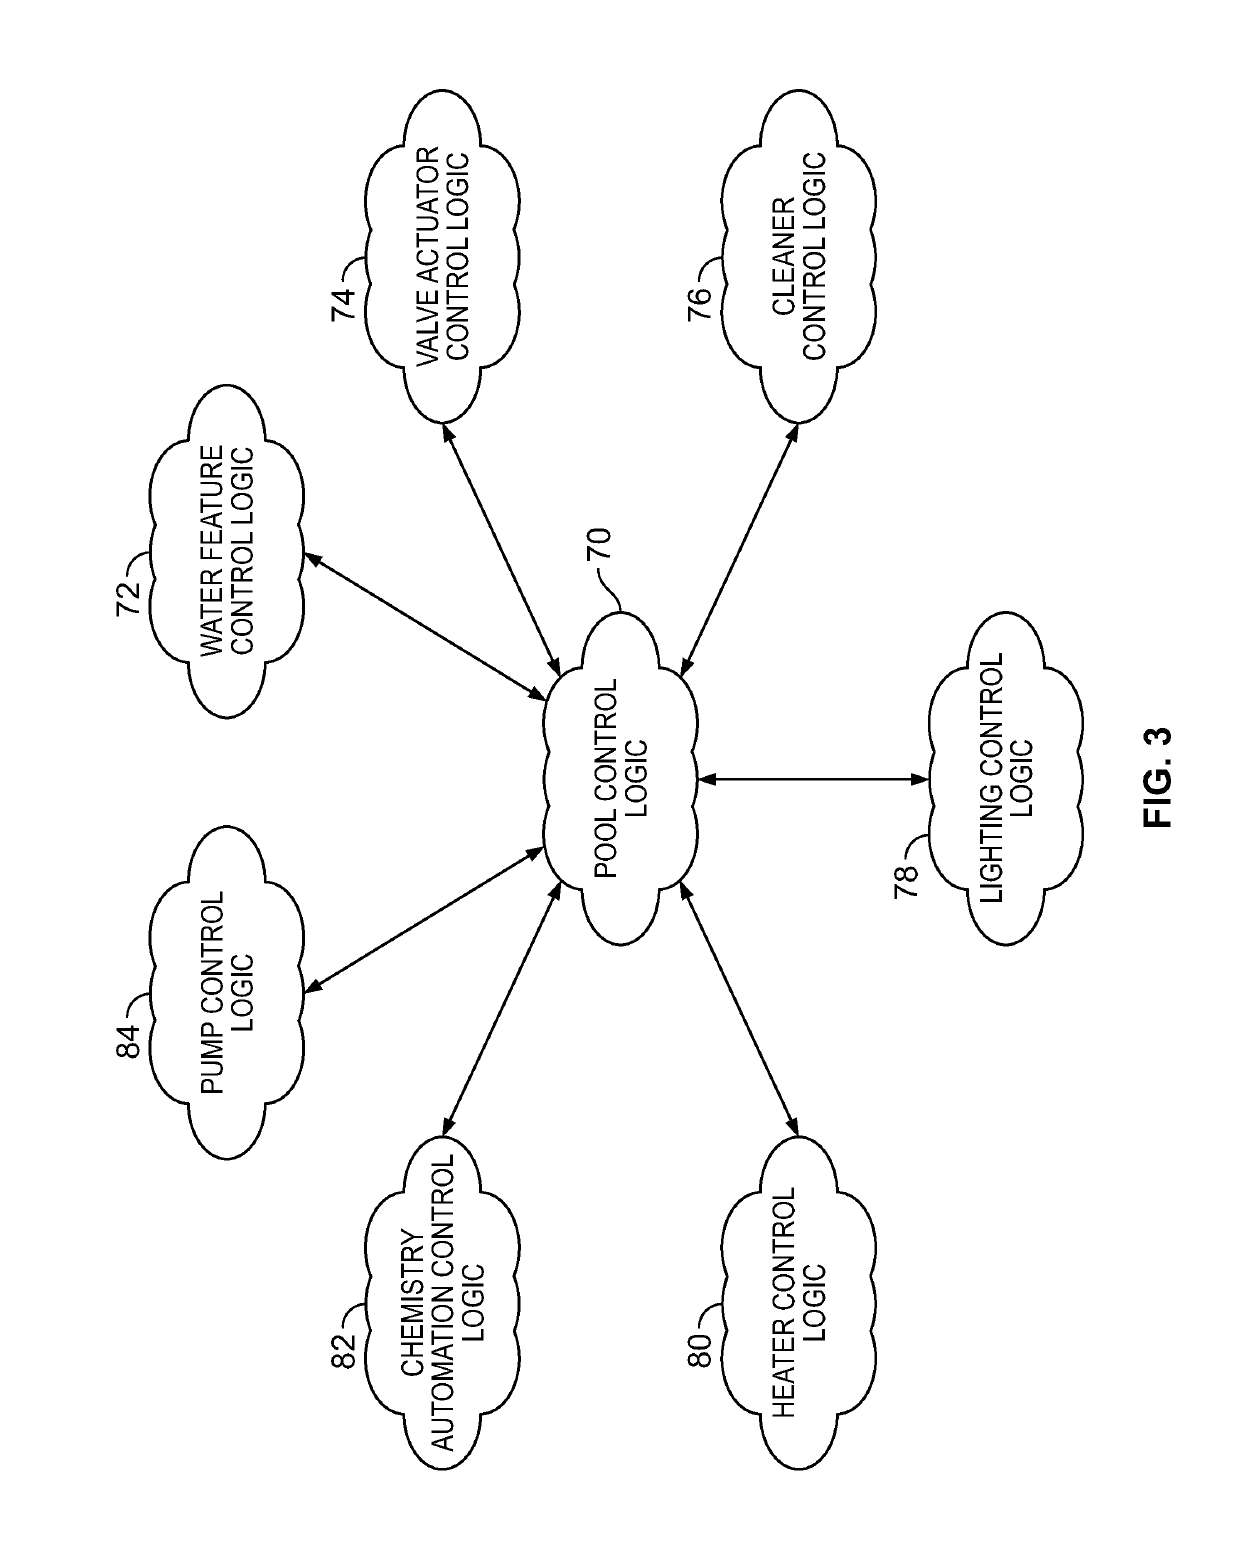 Systems and Methods for Providing Network Connectivity and Remote Monitoring, Optimization, and Control of Pool/Spa Equipment